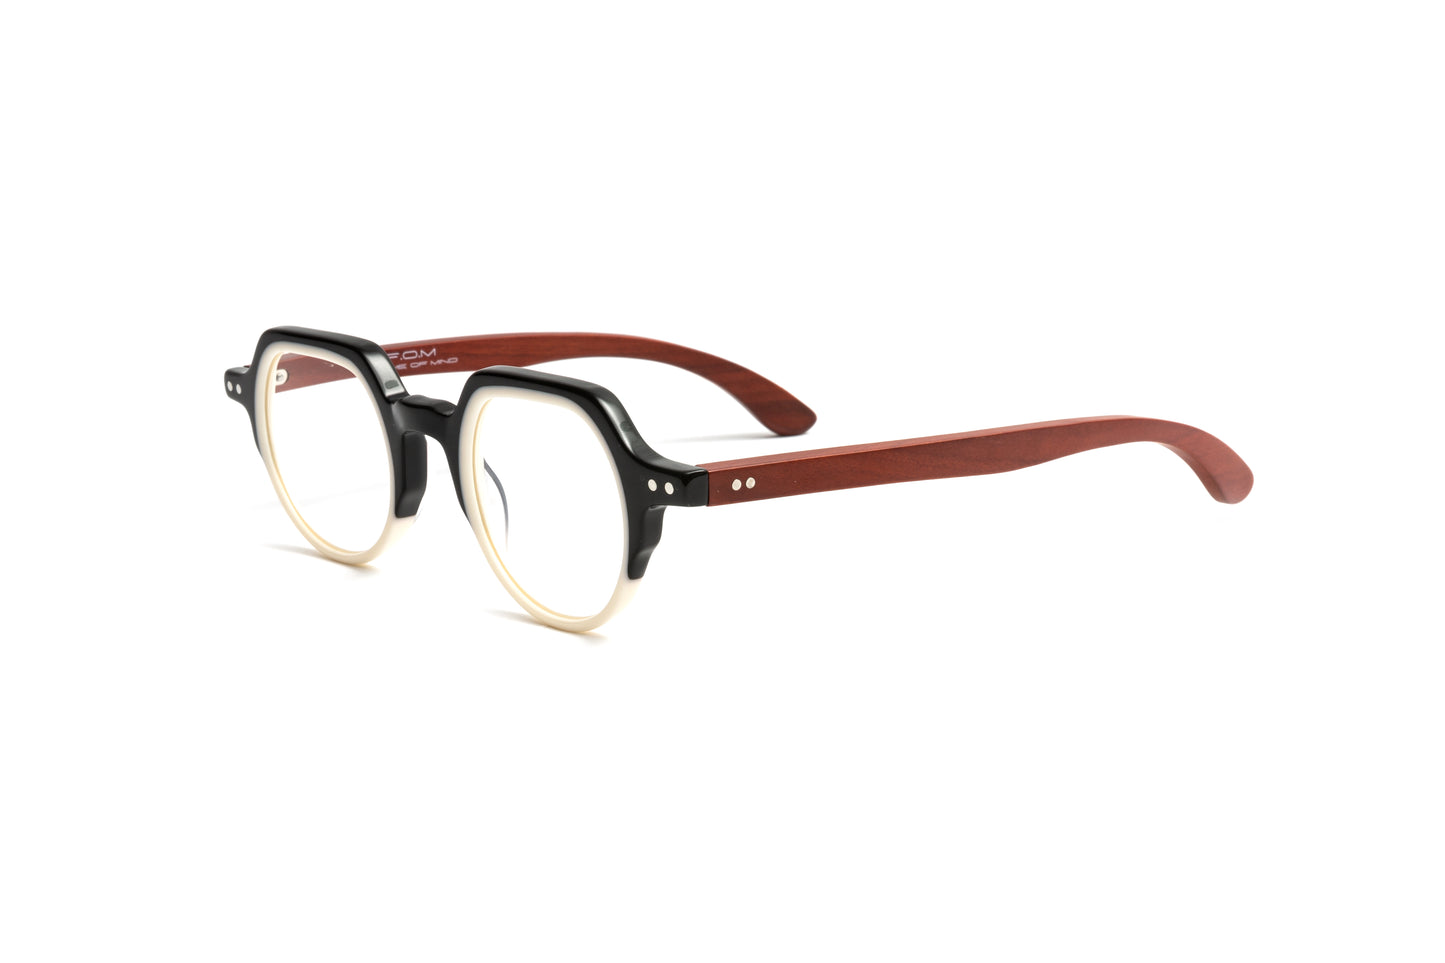 St Tropez unisex round readers with black and ivory acetate and cherry wood temples by Eyejets